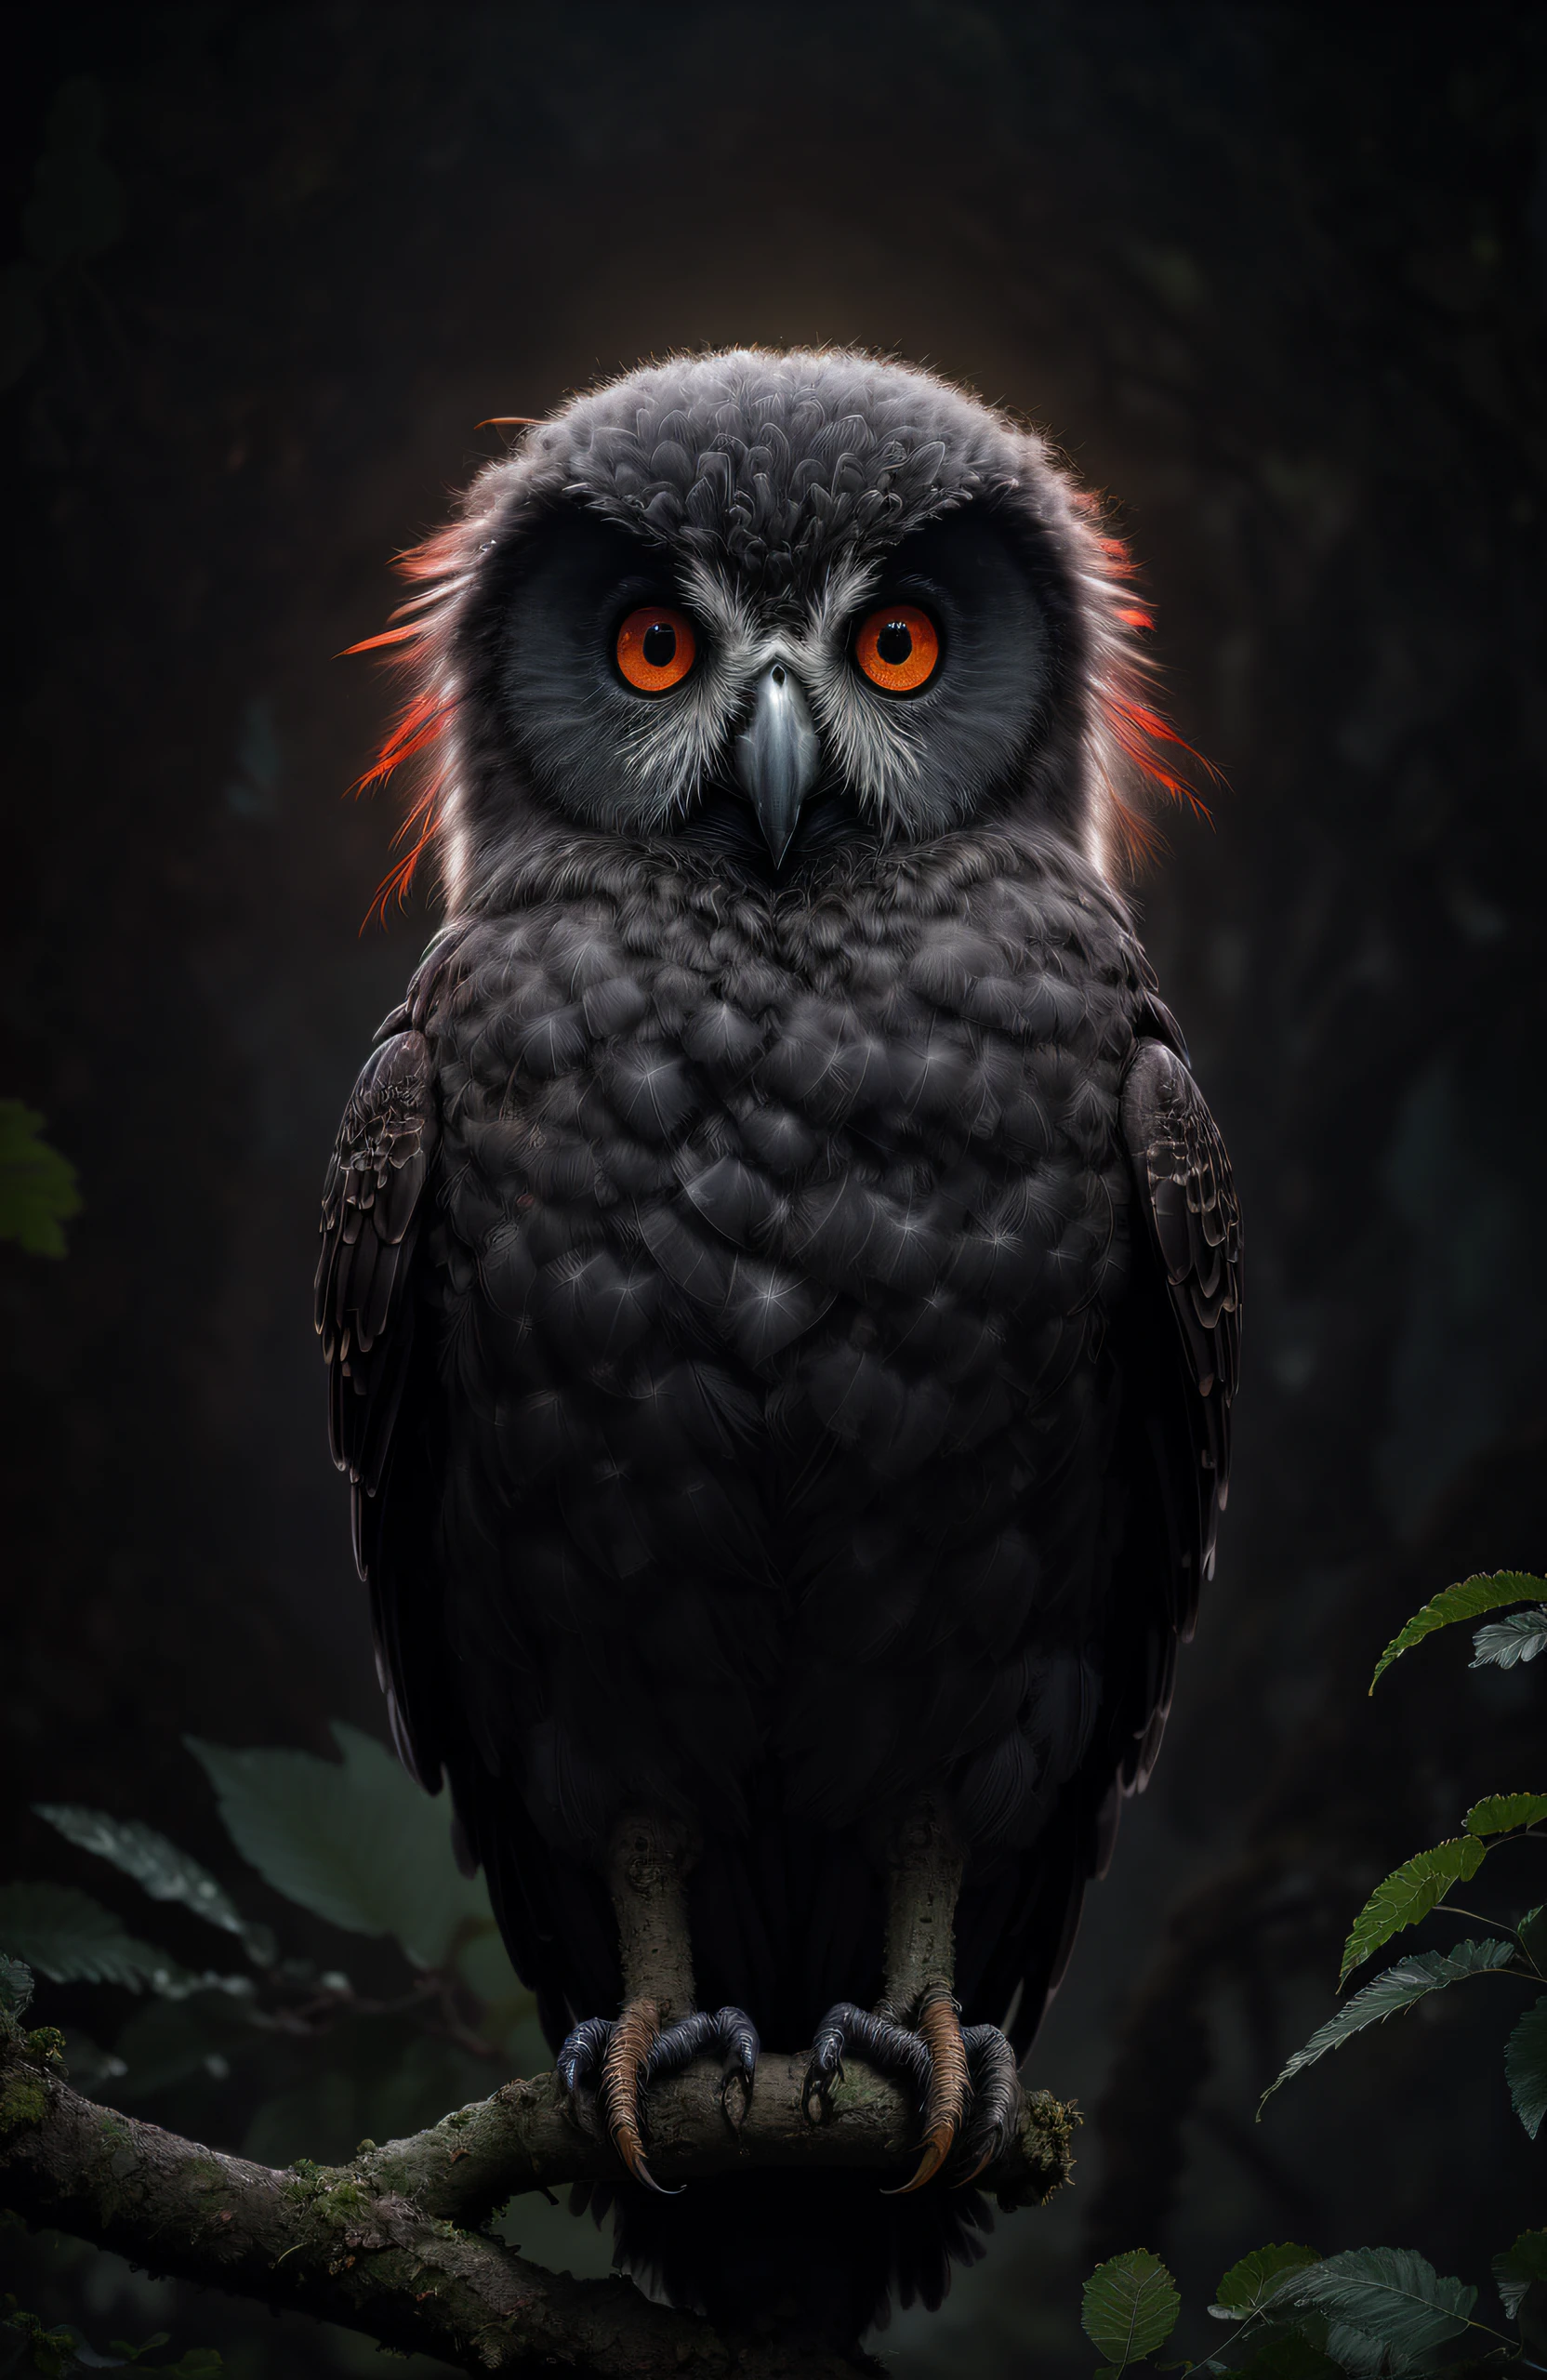 Style-NebMagic, award winning photo, A black bird owl sitting on a branch, feathers, evil, sinister, red eye, intricate, detailed feathers, forest background, wildlife photography, by lee jeffries nikon d850 film stock photograph 4 kodak portra 400 camera f1.6 lens rich colors hyper realistic lifelike texture dramatic lighting trending on artstation cinestill 800, Style-LostTemple, deep shadow, high contrast, dark, full moon